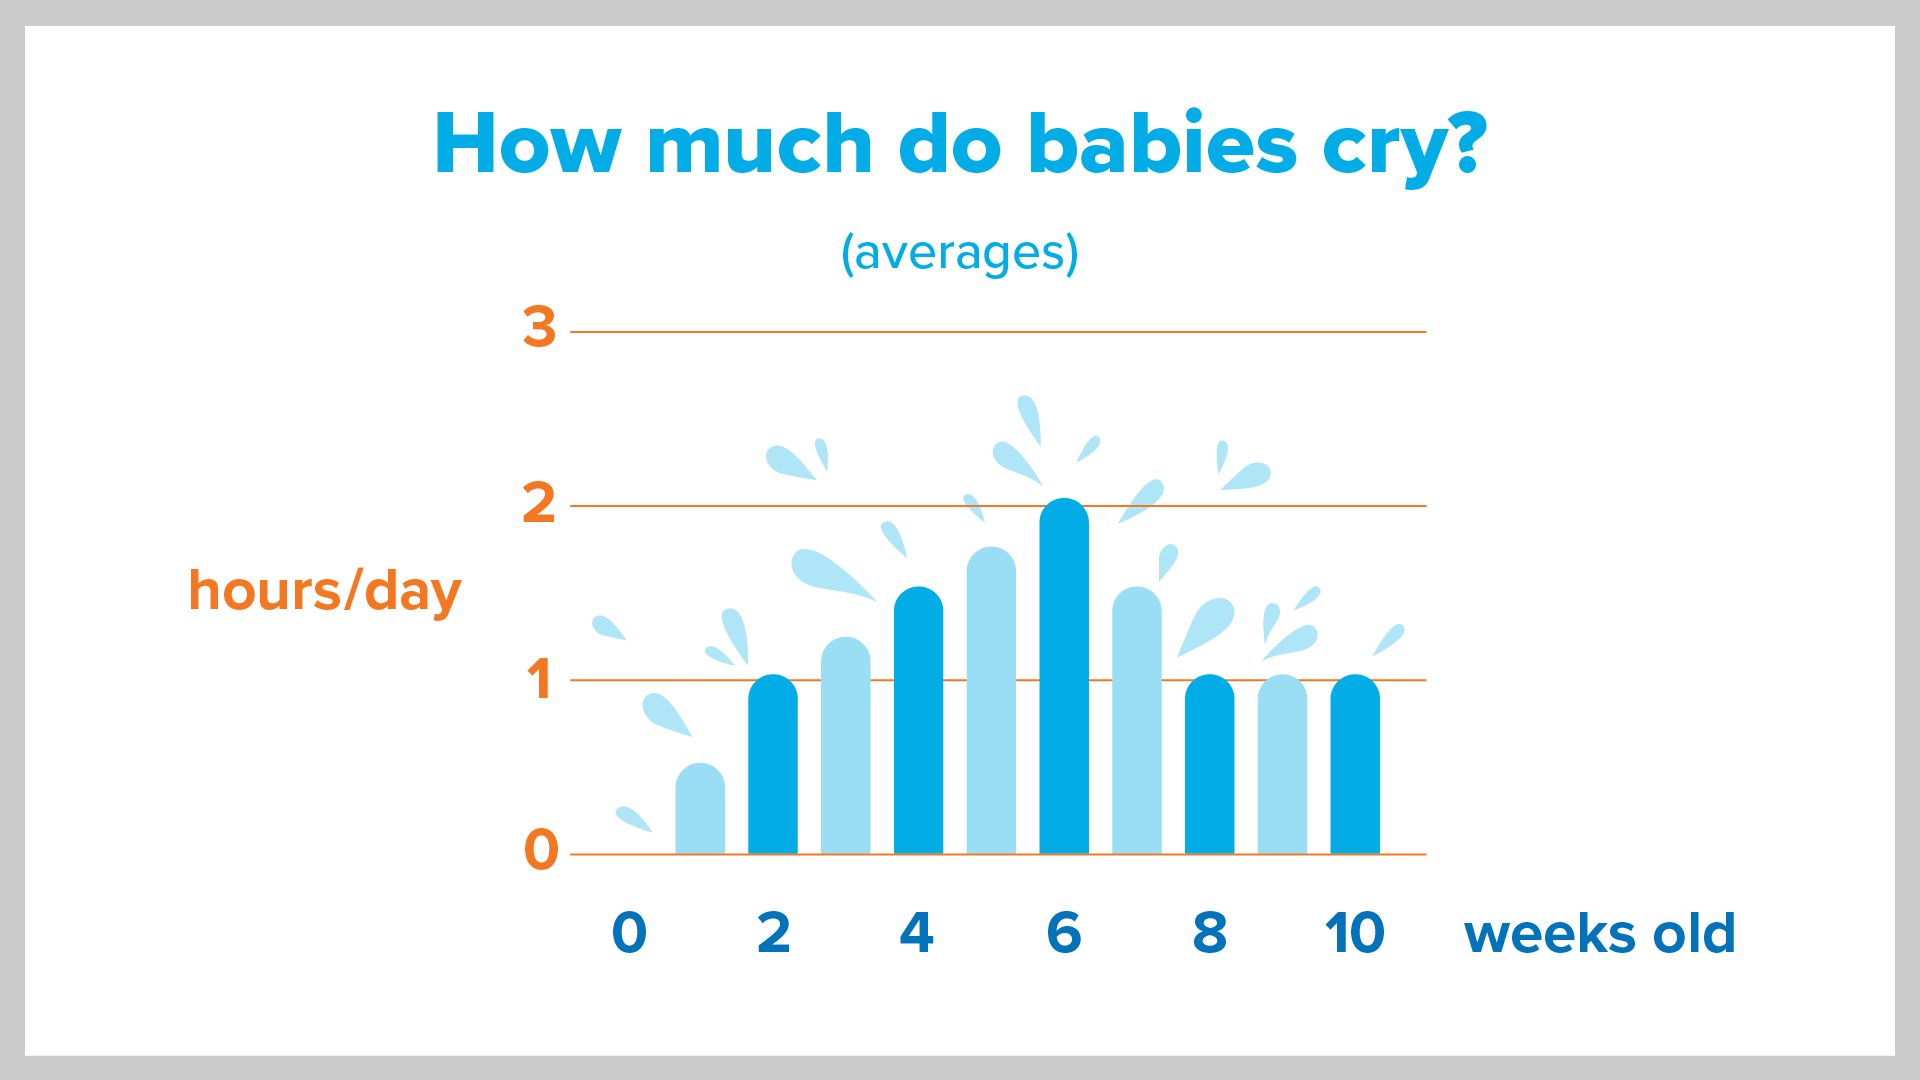 How much do babies cry at each week old